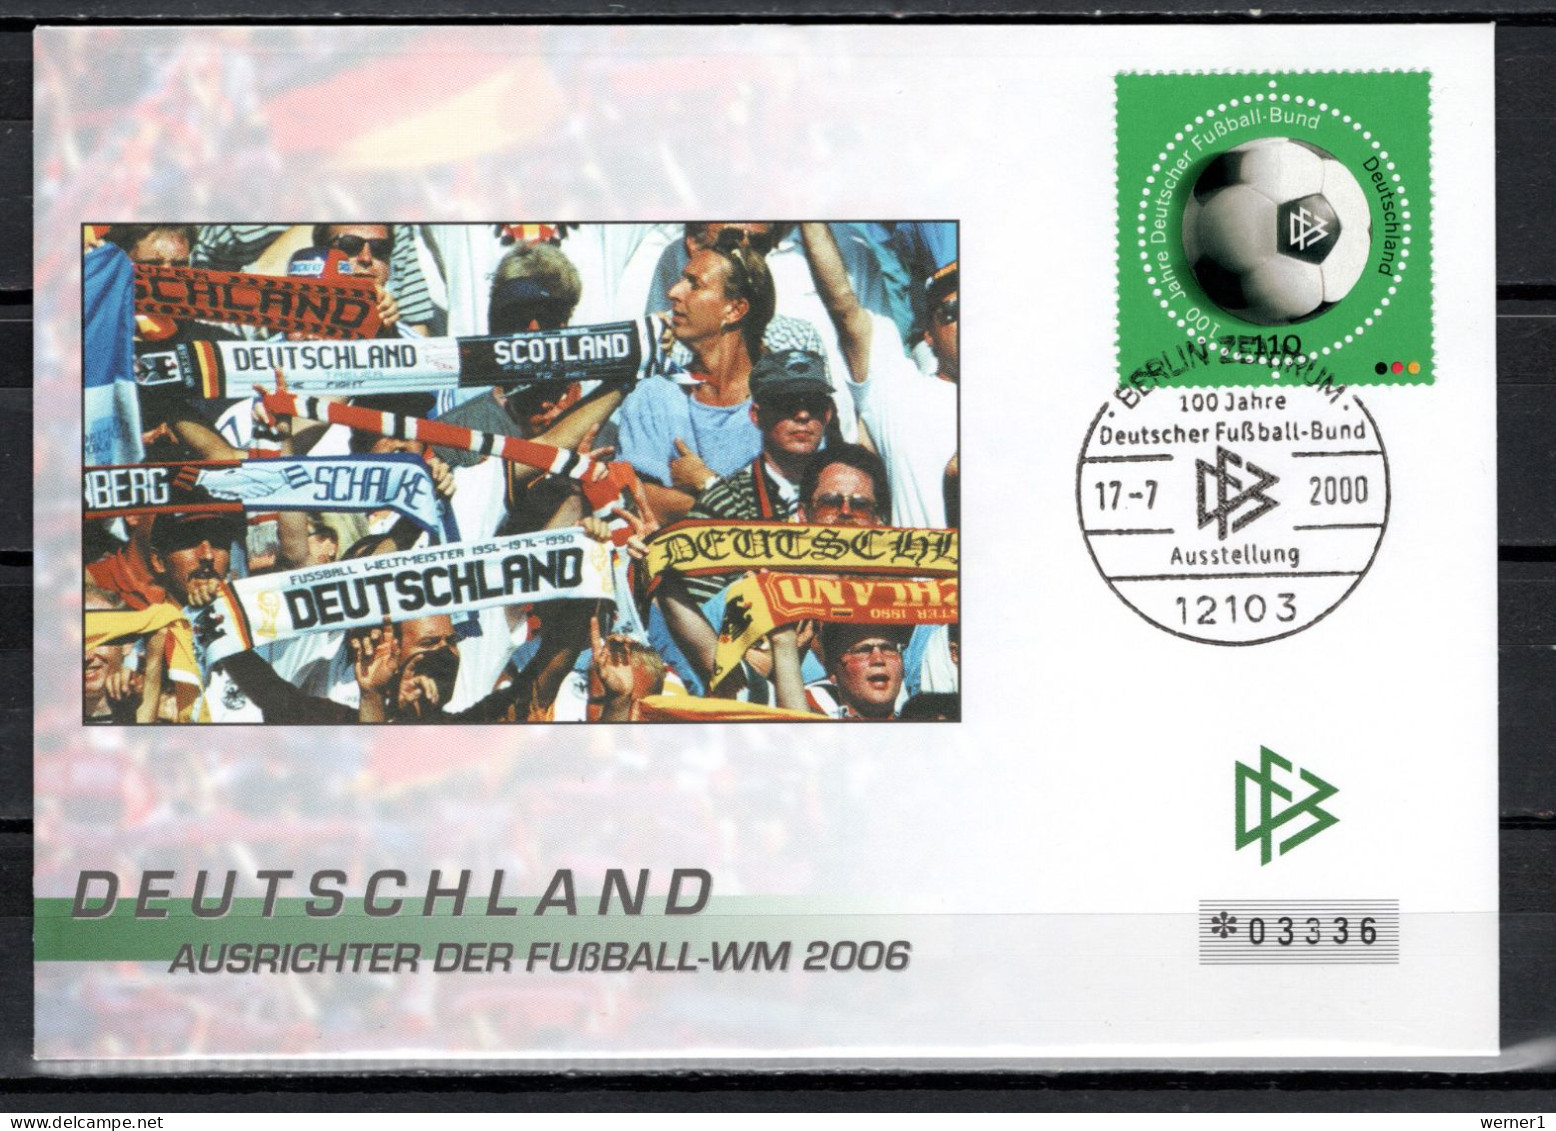 Germany 2000 Football Soccer World Cup Commemorative Cover - 2006 – Allemagne